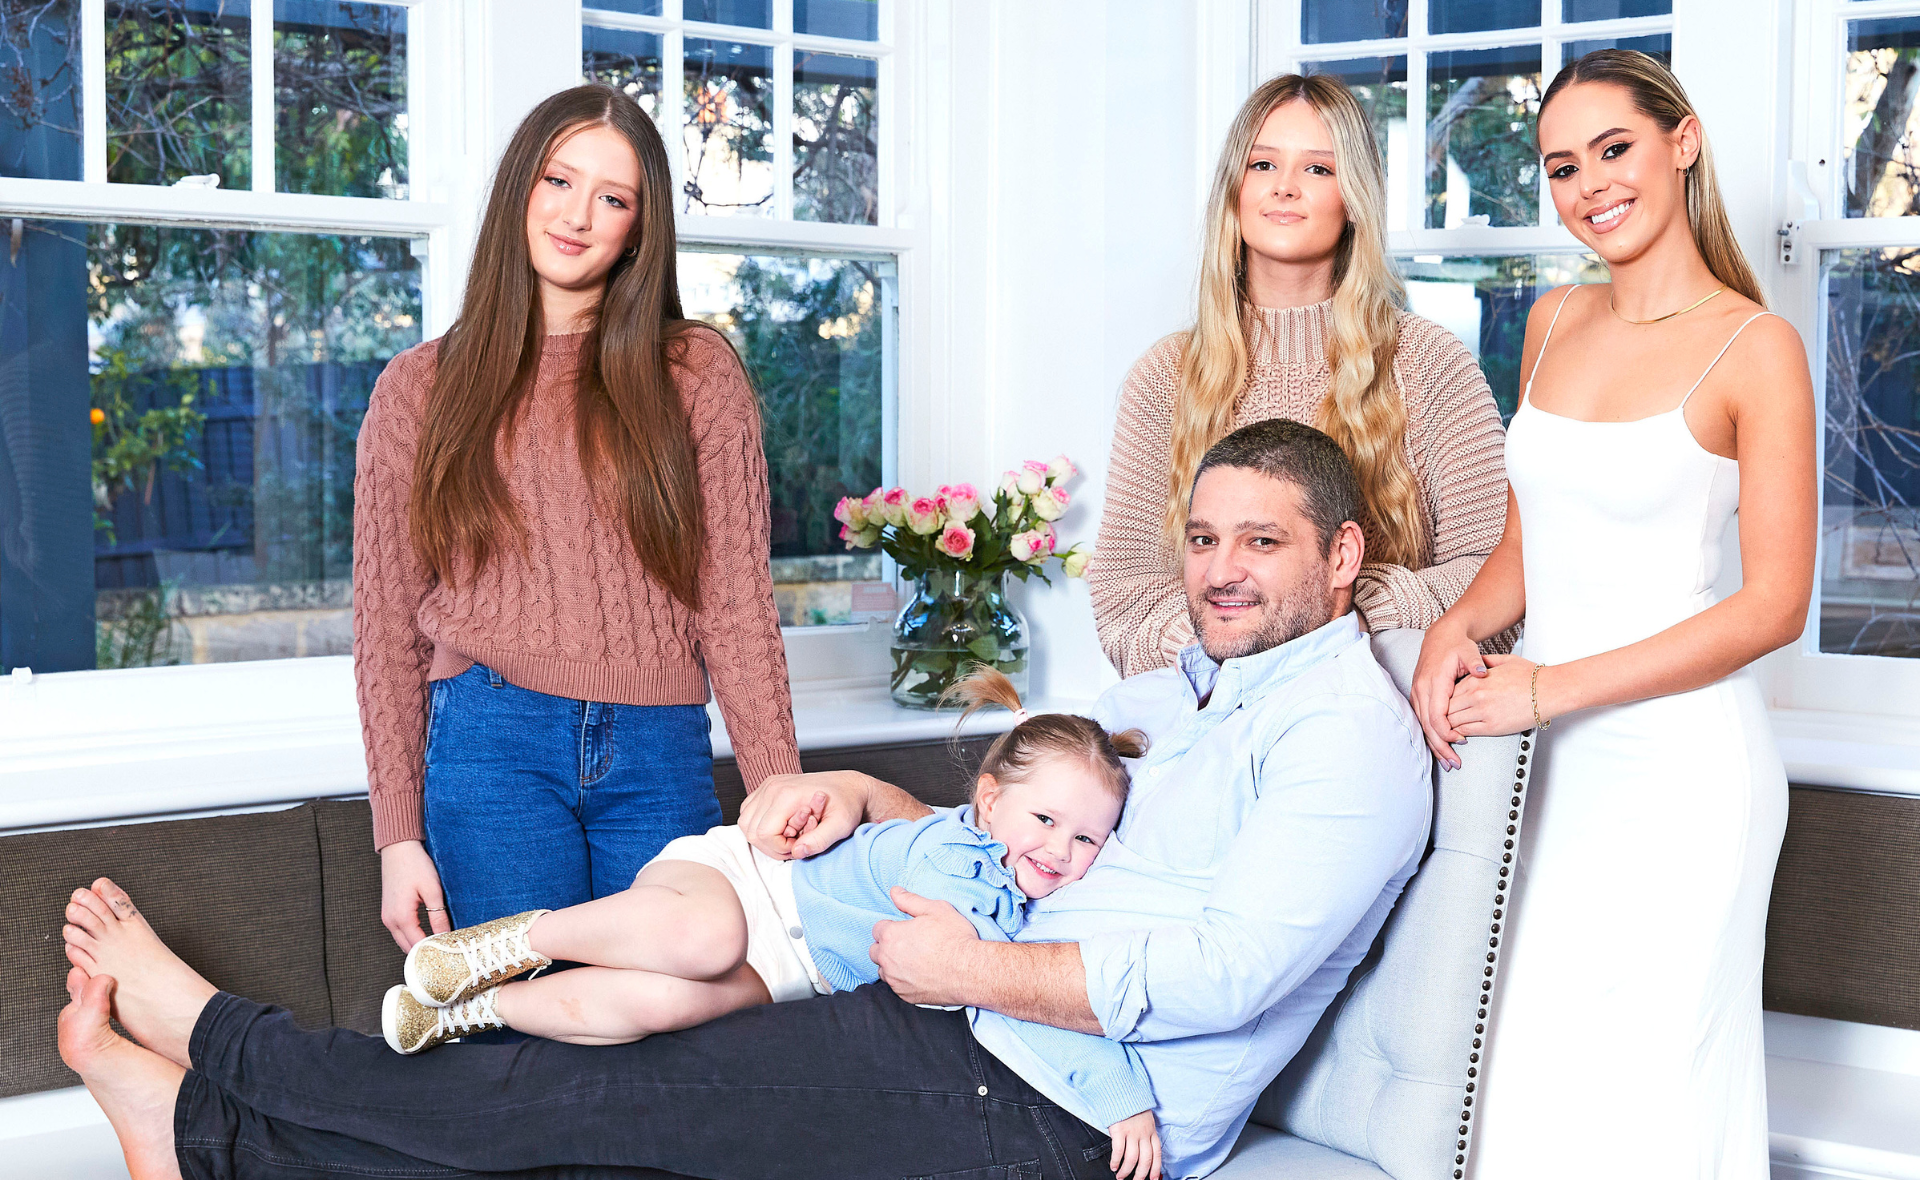 EXCLUSIVE: Brendan Fevola has left behind his wild days to be a dedicated dad to four girls